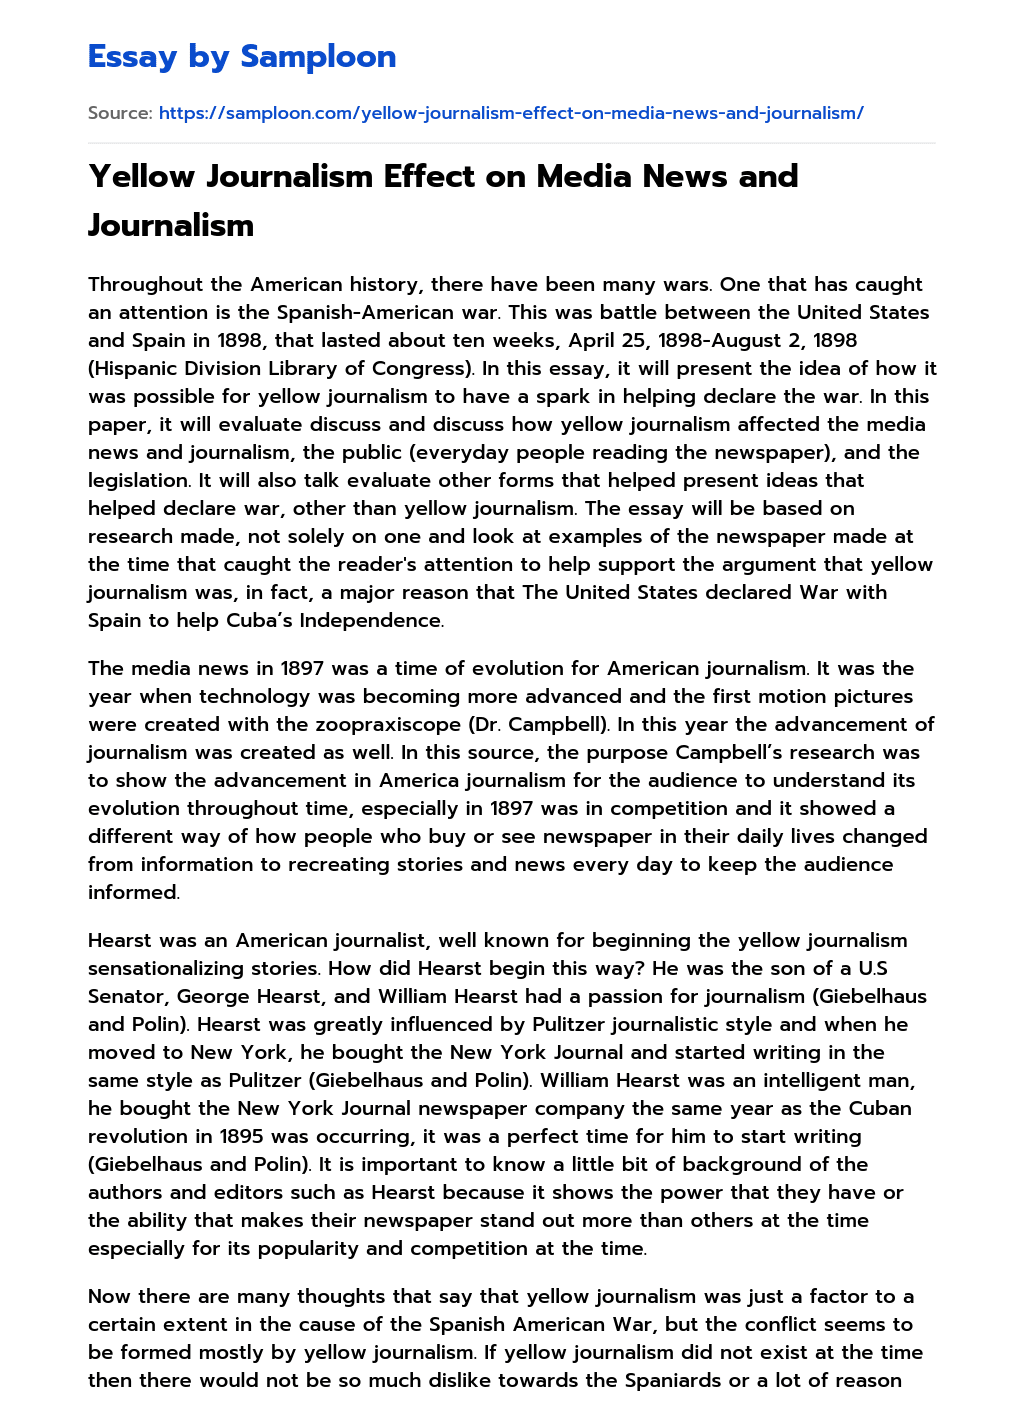 Yellow Journalism Effect on Media News and Journalism essay